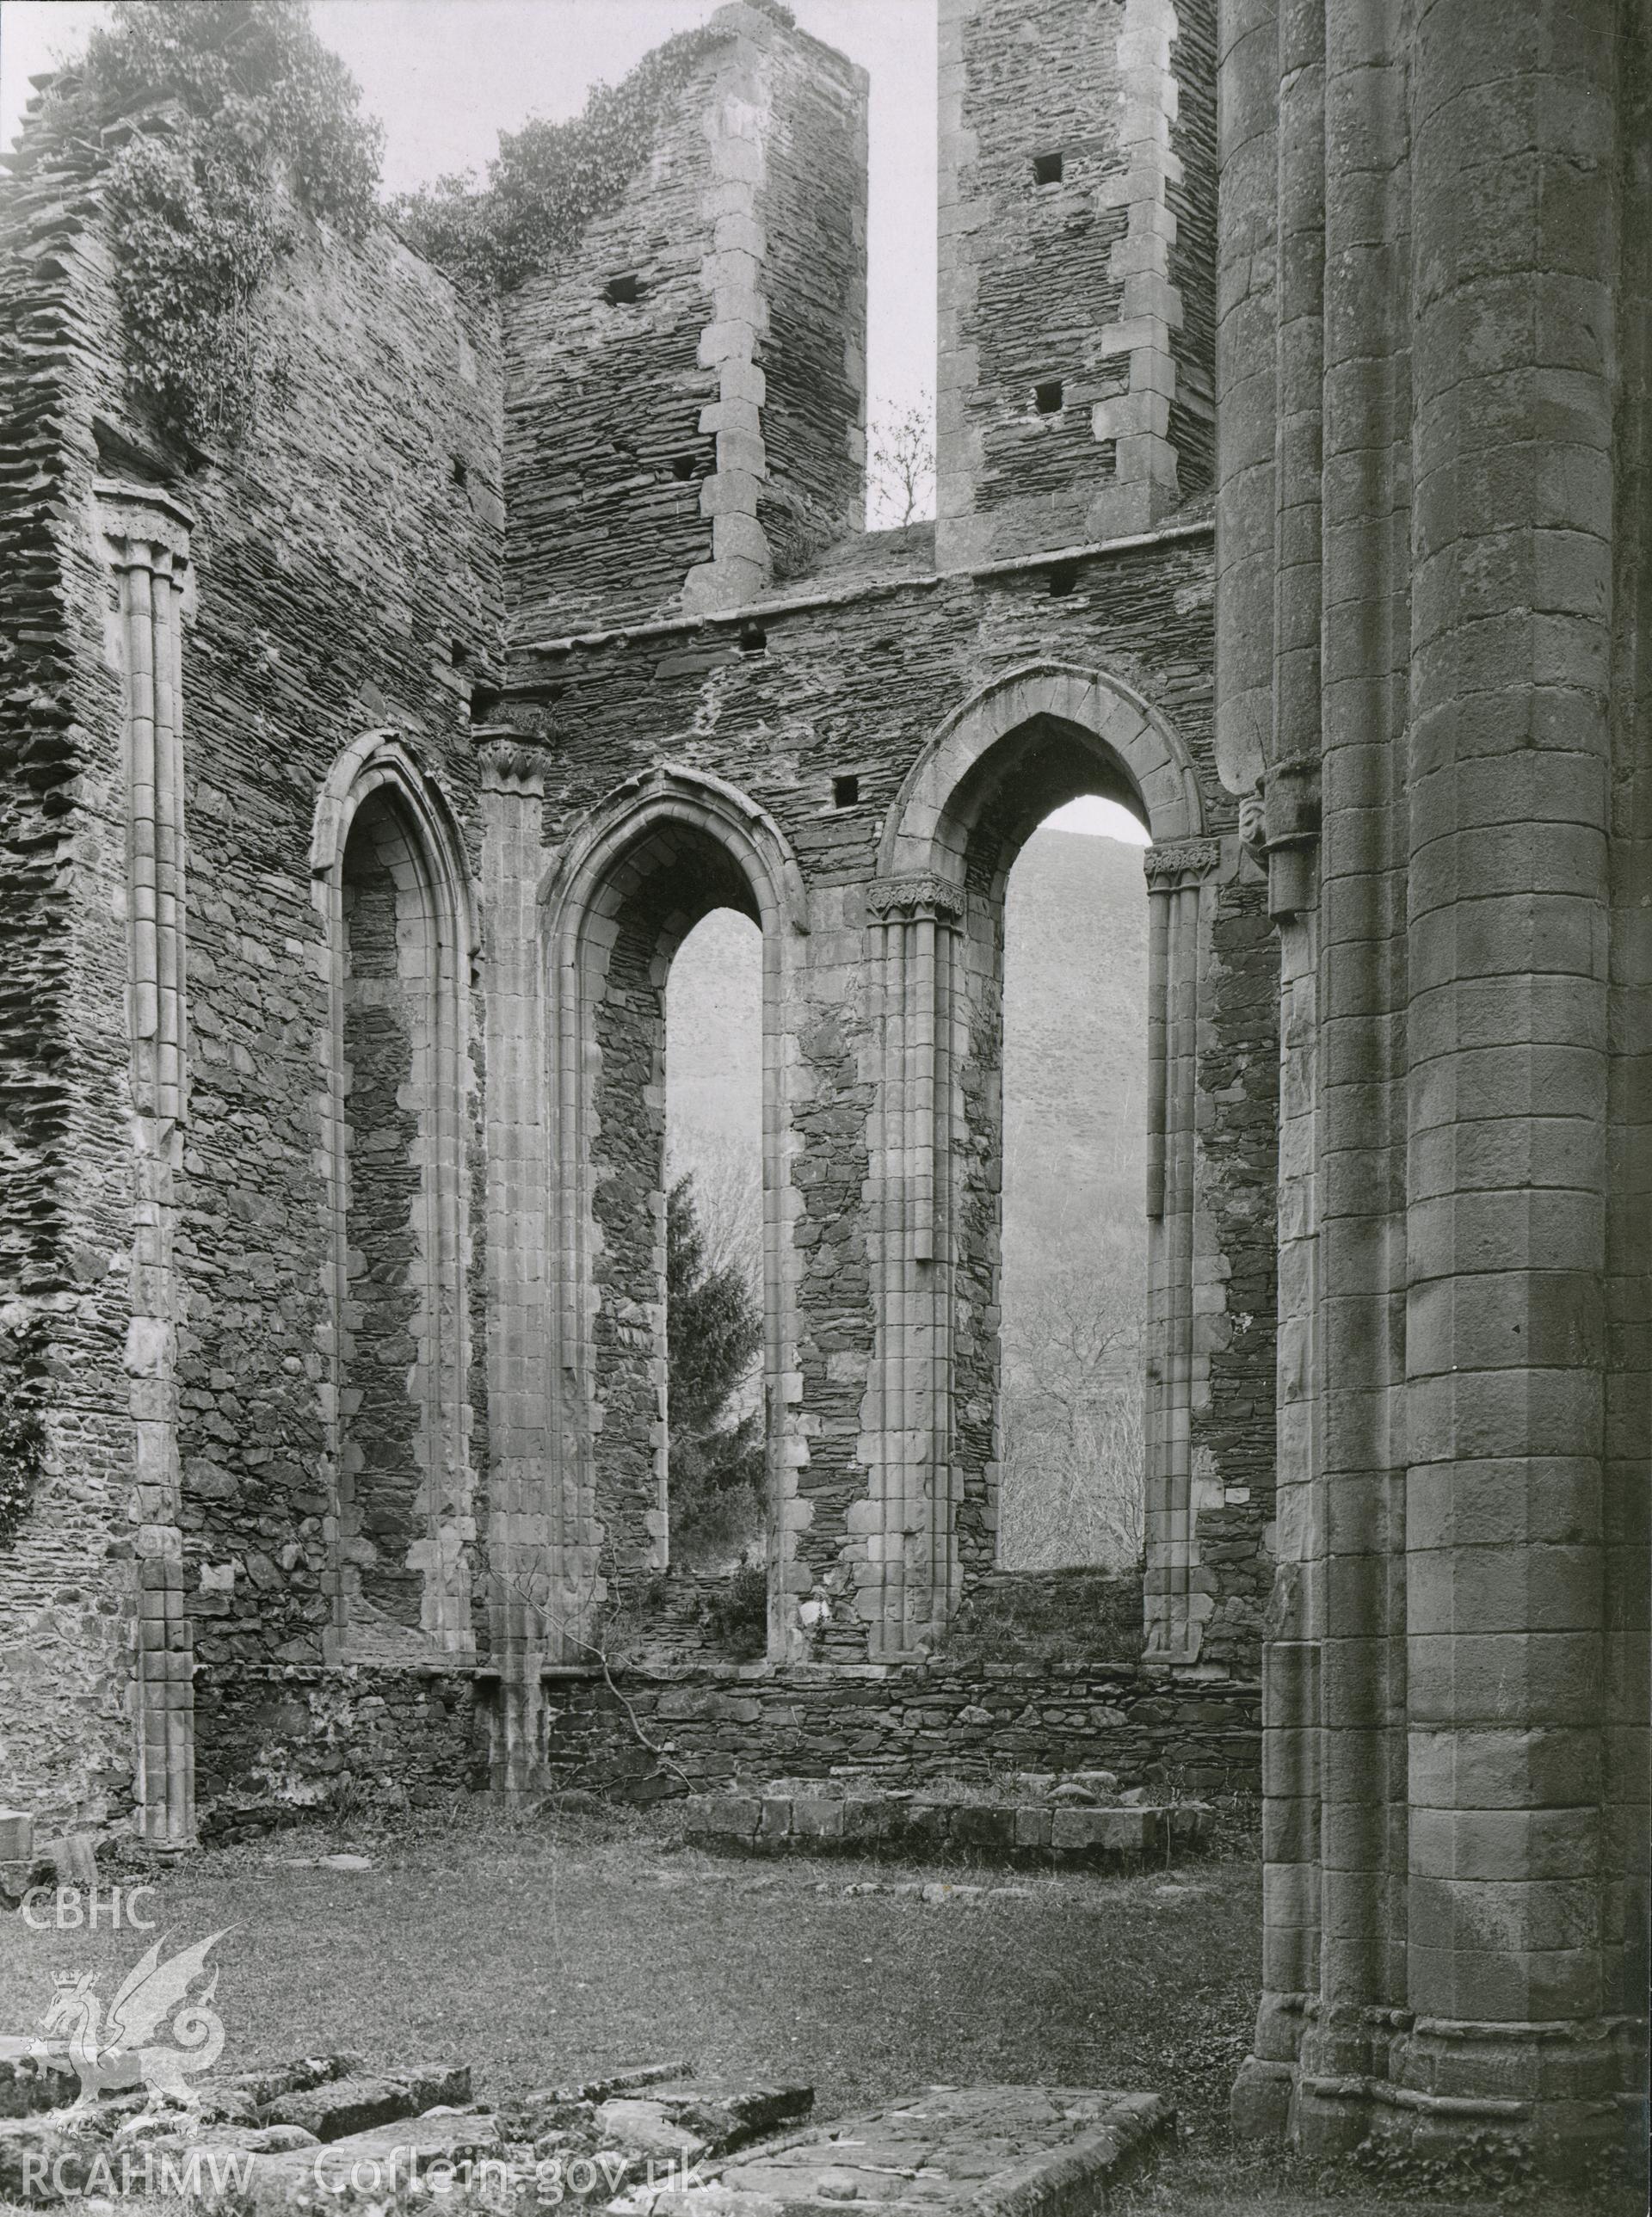 Digitised copy of a black and white photograph showing east end of church at Valle Crucis Abbey, taken by F.H. Crossley, 1949. Copied from print as negative held by NMR England (Historic England)